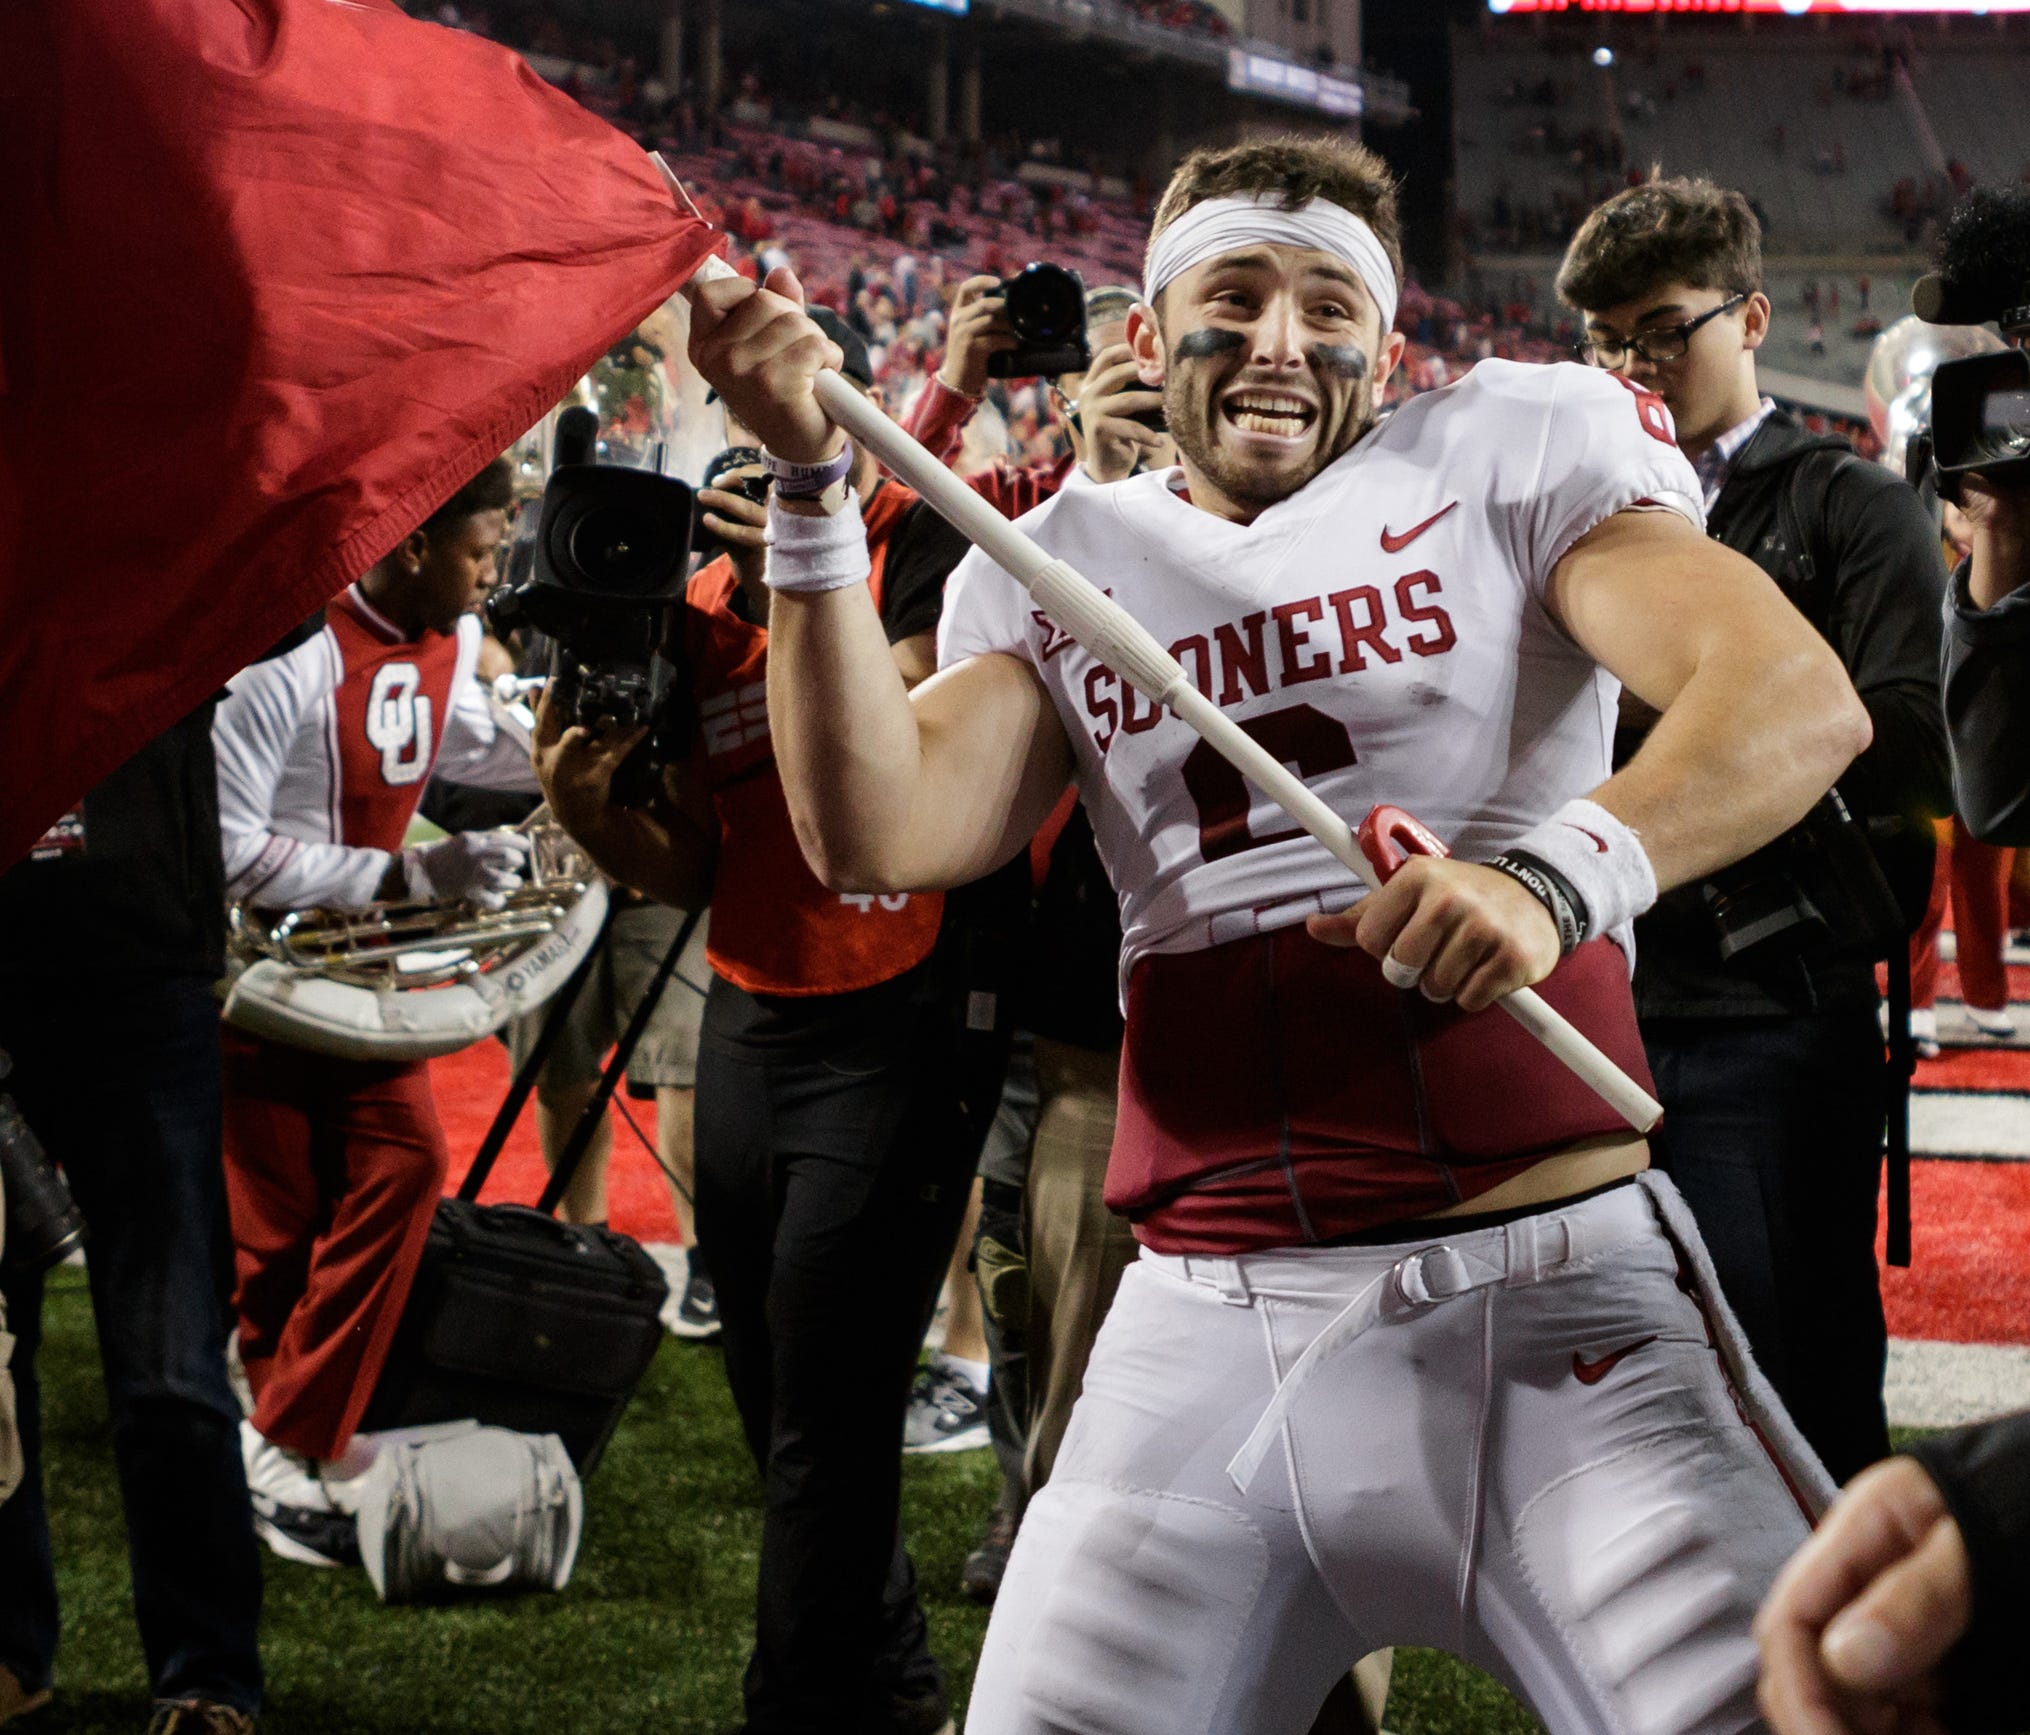 September 9th, 2017: Oklahoma Sooners quarterback Baker Mayfield (6) waves the OU flag on the field after a NCAA football game between the Ohio State Buckeyes and the Oklahoma Sooners at Ohio Stadium, Columbus, OH. Oklahoma defeated Ohio State 31-16.